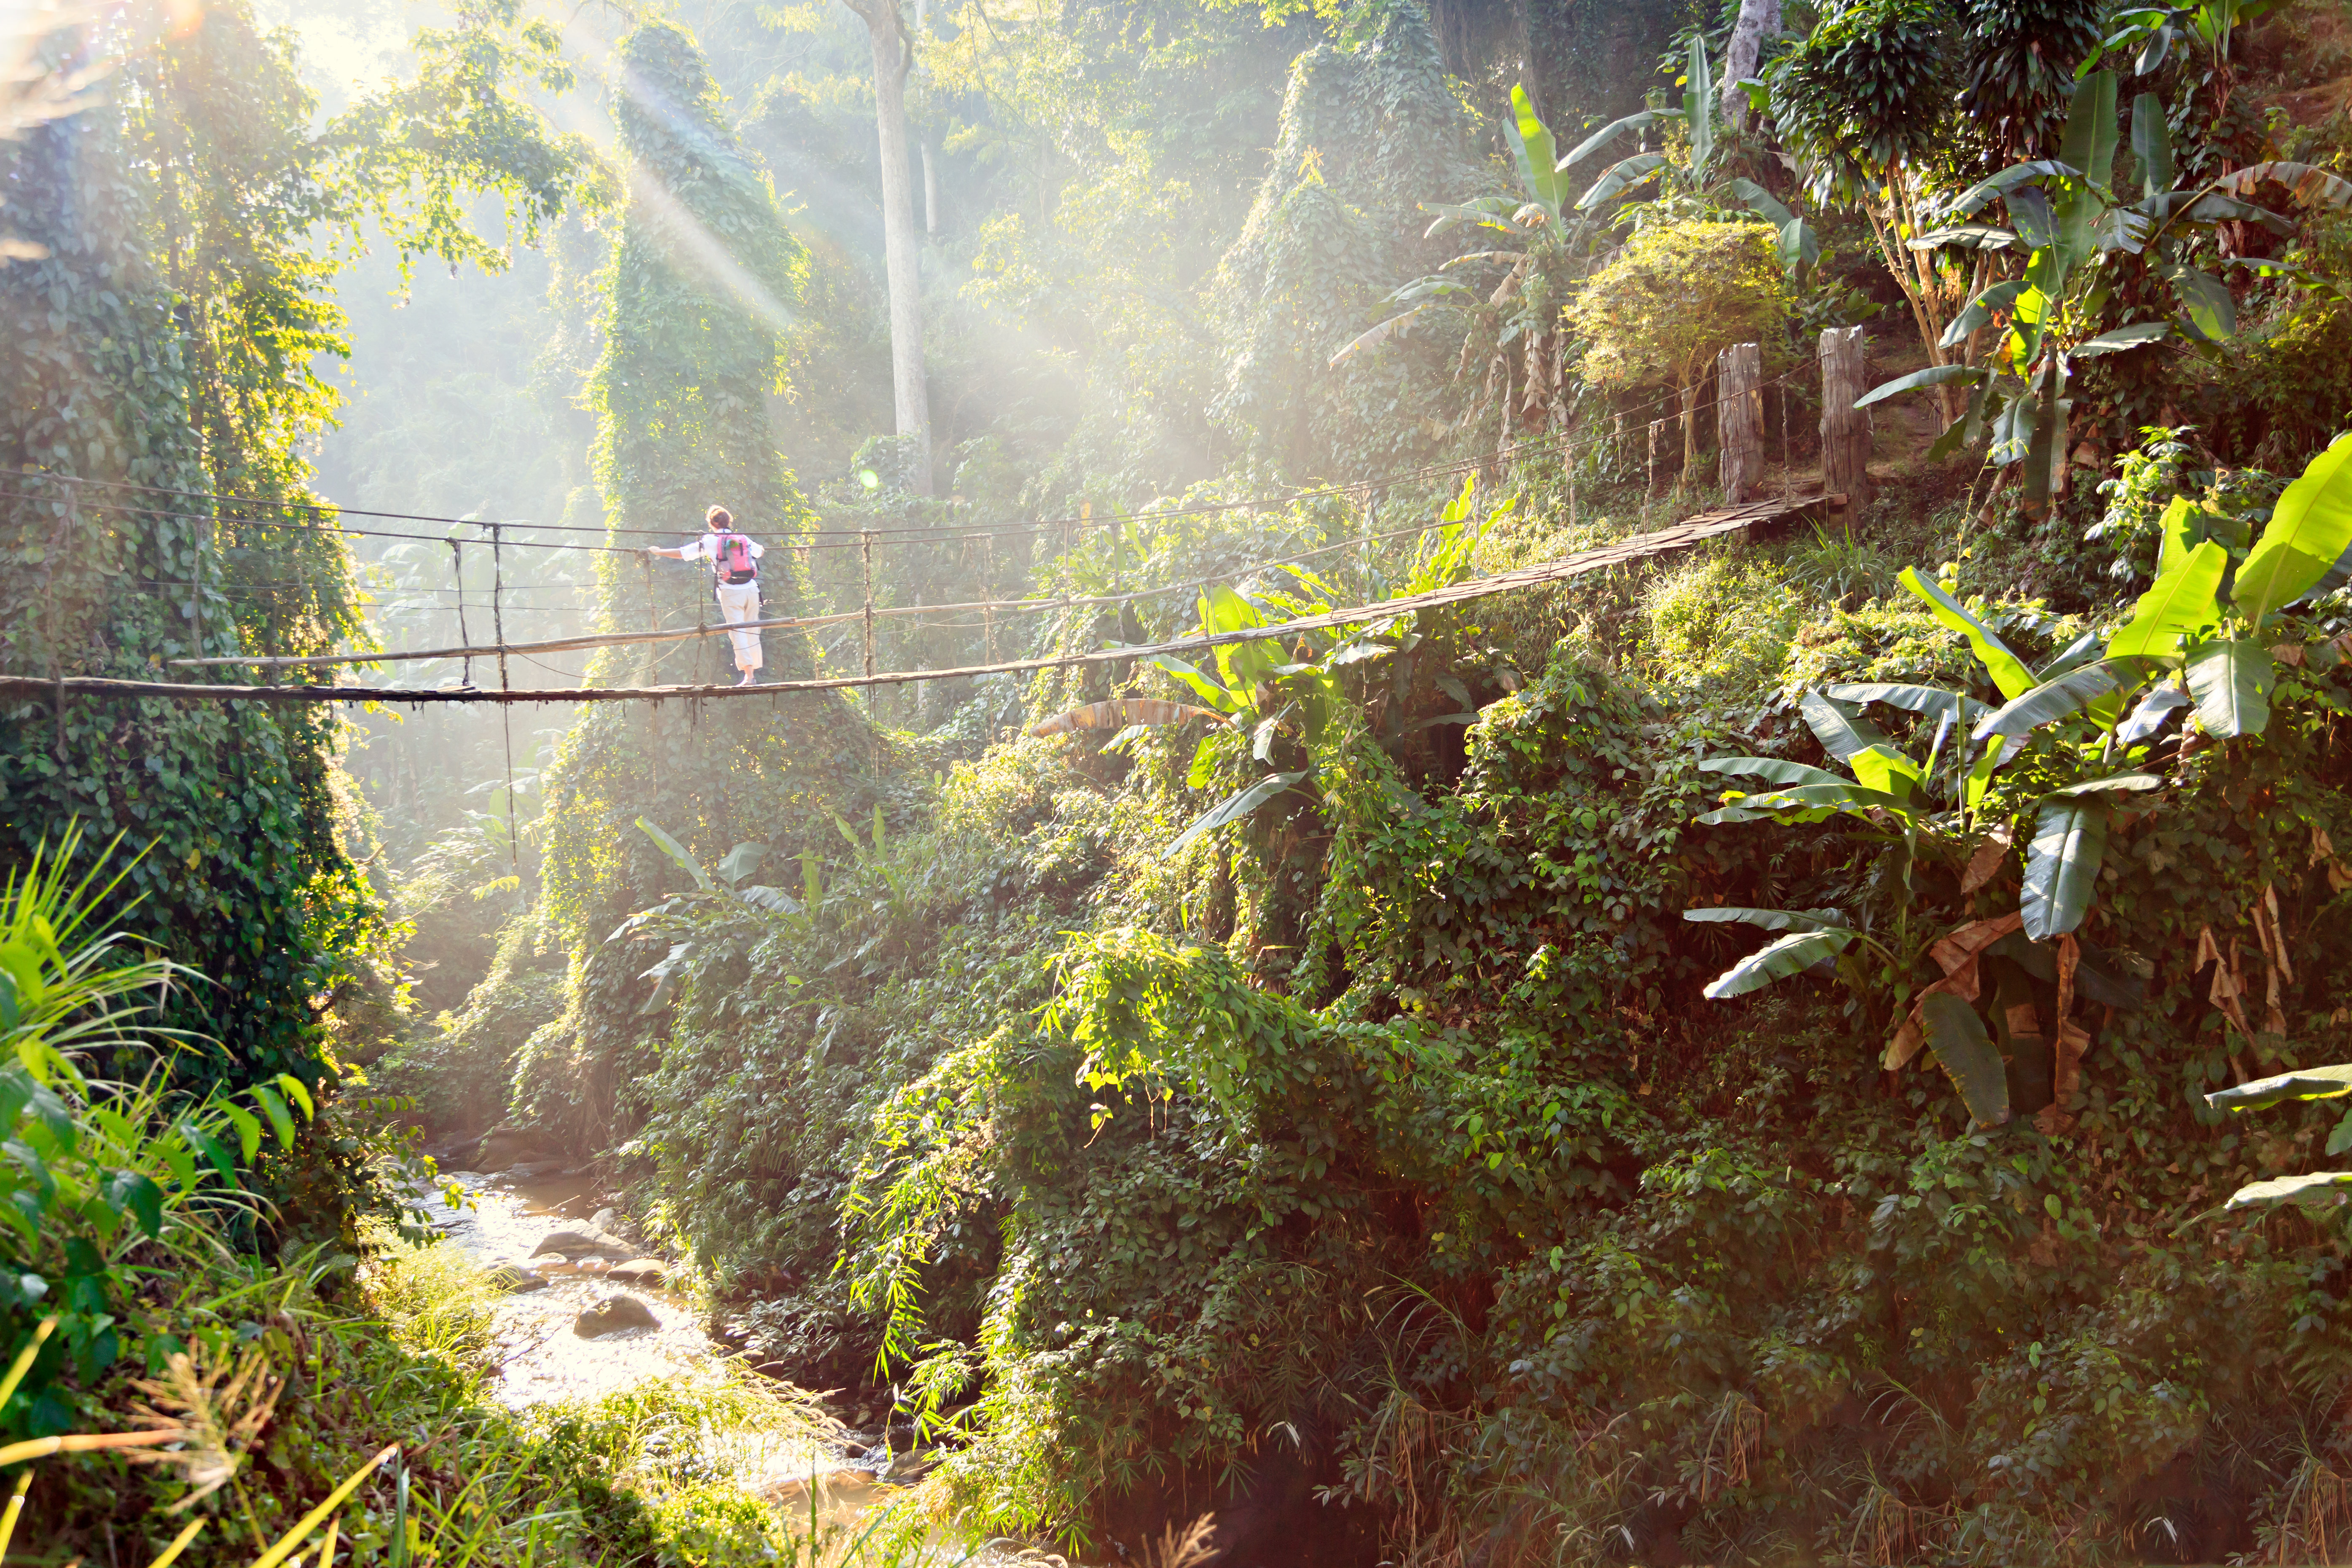 Woman-with-backpack-on-suspension-bridge-in-rainforest-509184494 5580x3720